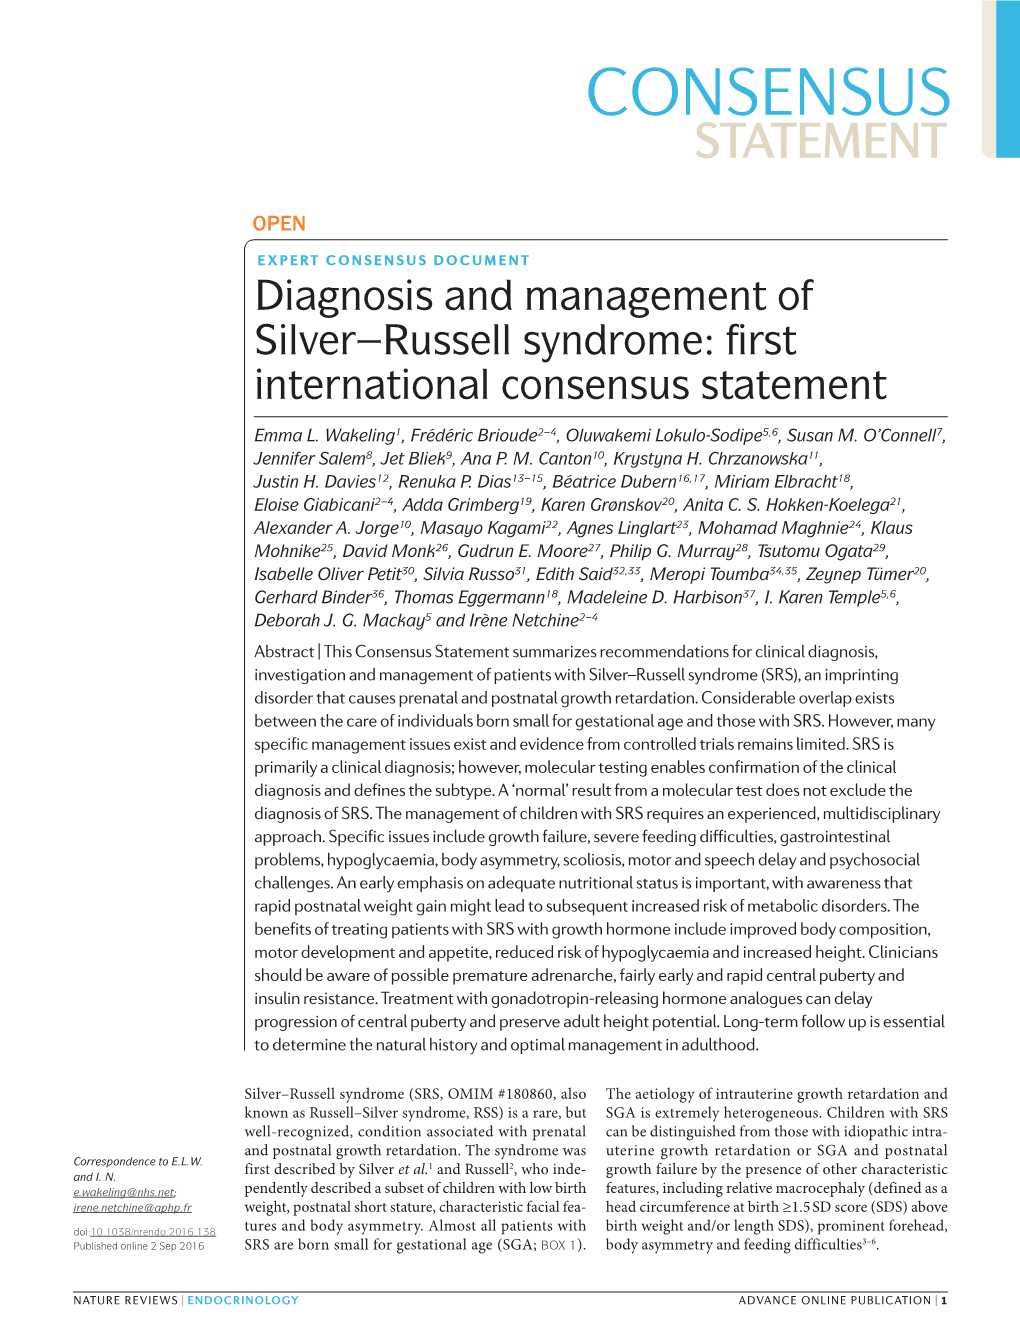 Silver Russell Syndrome to Expand the Endocrinol